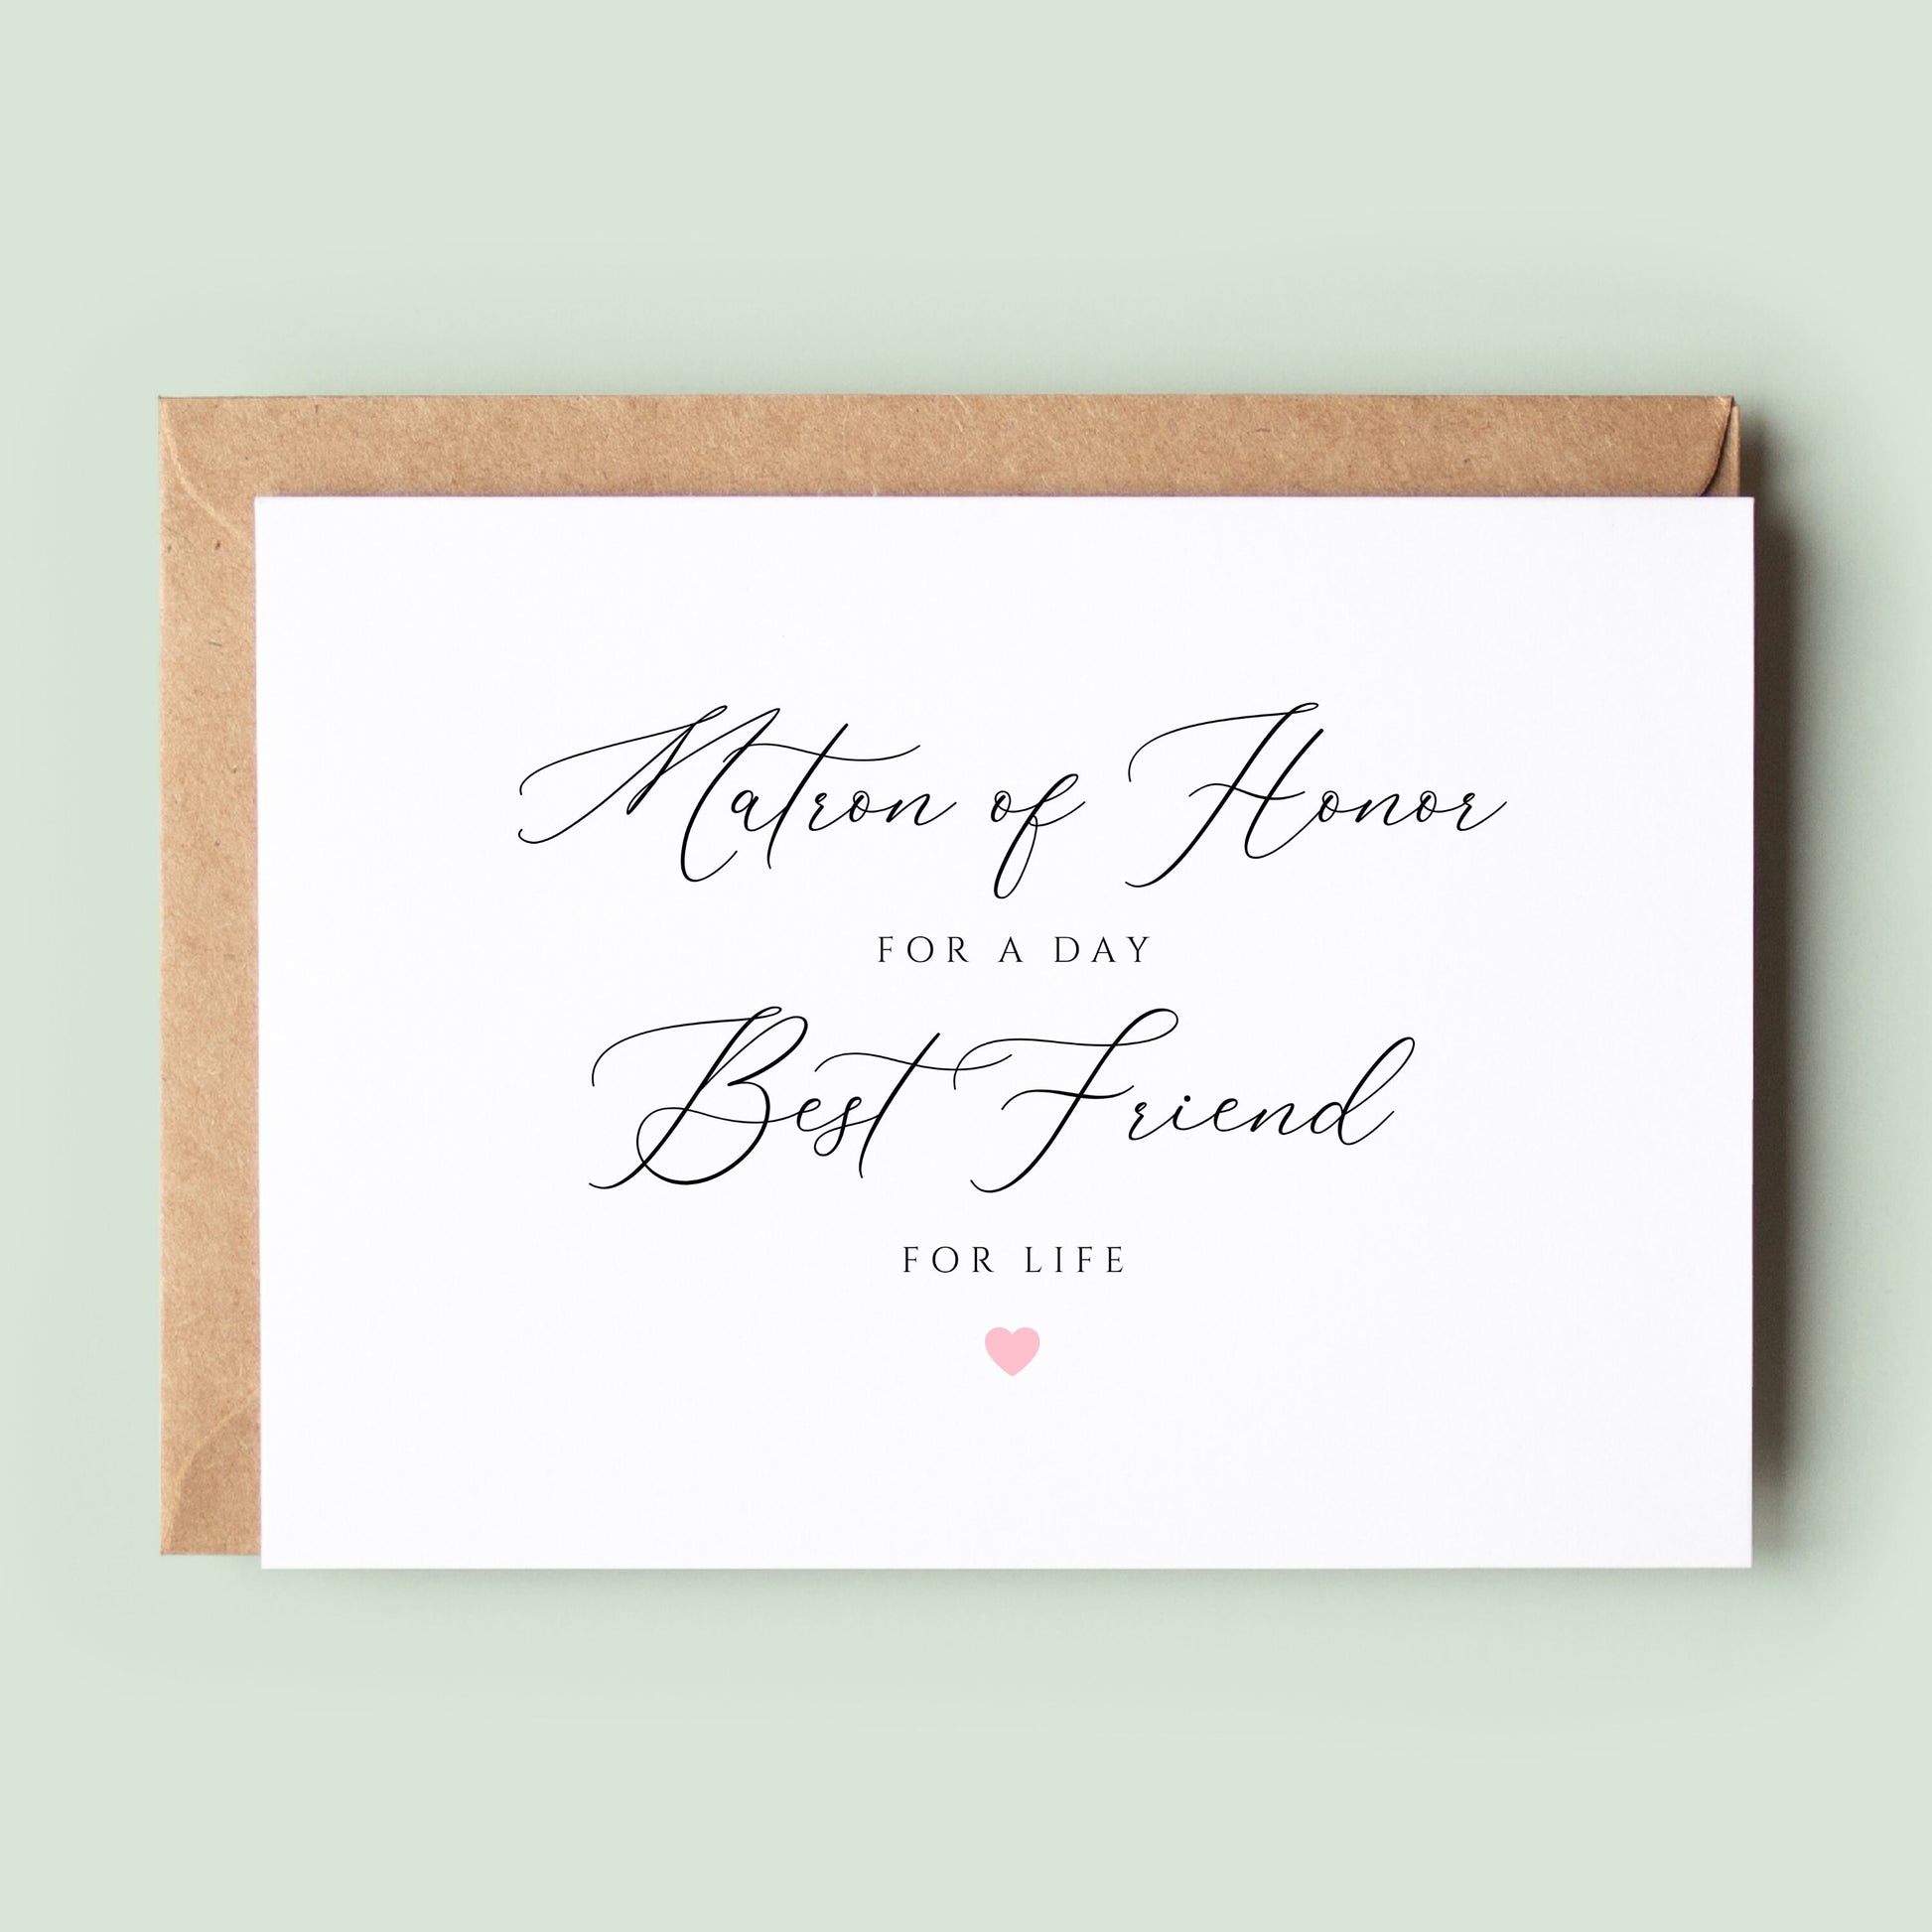 Bridesmaid for a Day, Best Friend for Life Card, Will You Be My Bridesmaid, Bridesmaid Proposal, Bridesmaid Proposal Box, Bridal Party #015